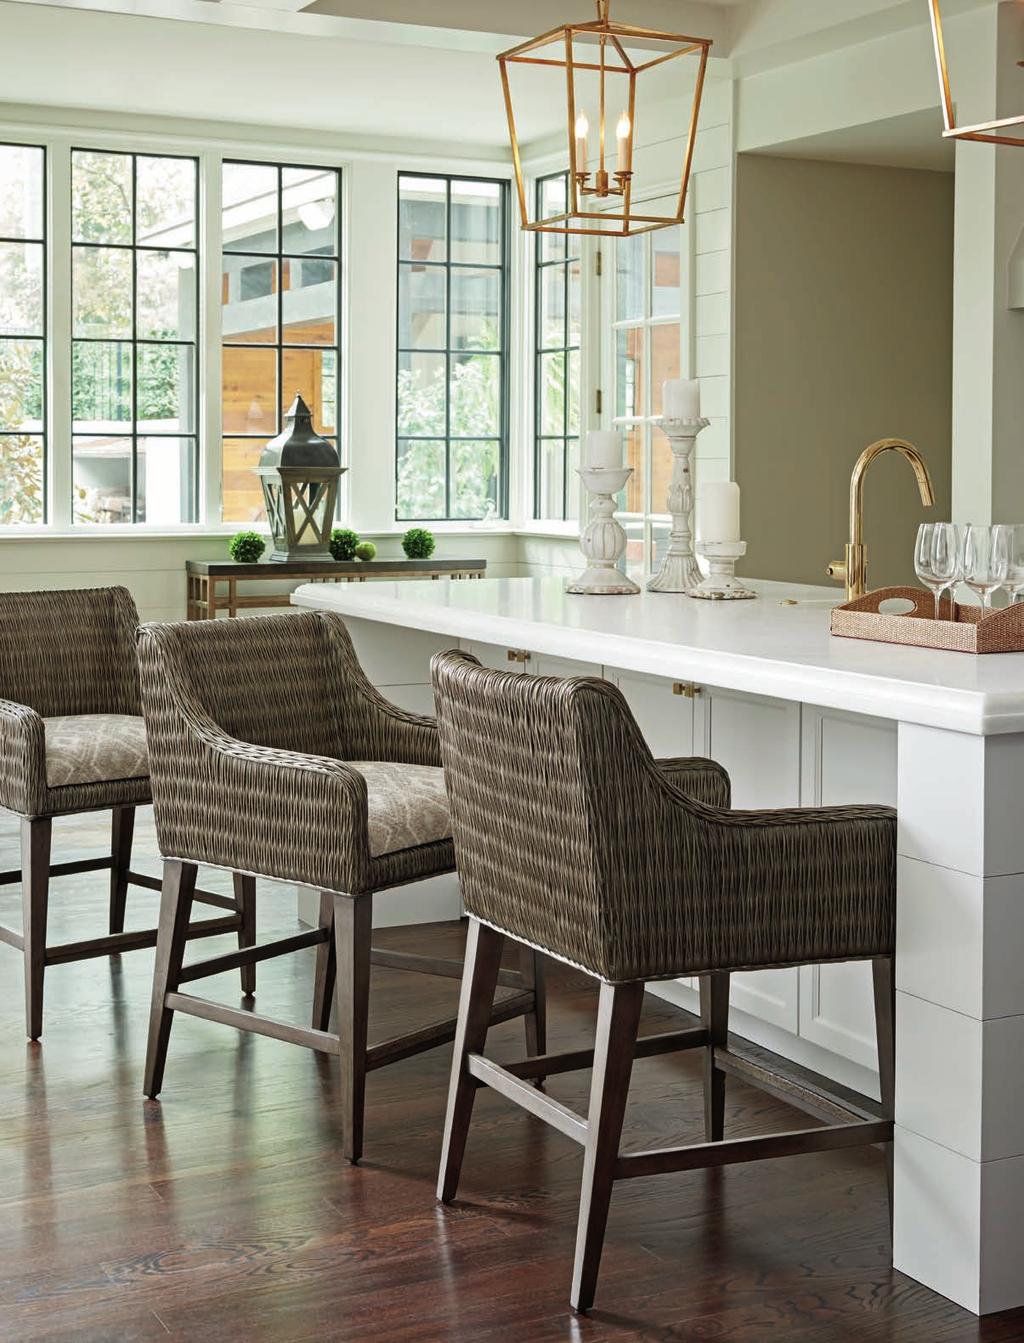 The Turner counter and bar stools feature a woven rattan frame in the Smoke Gray finish with an upholstered seat.